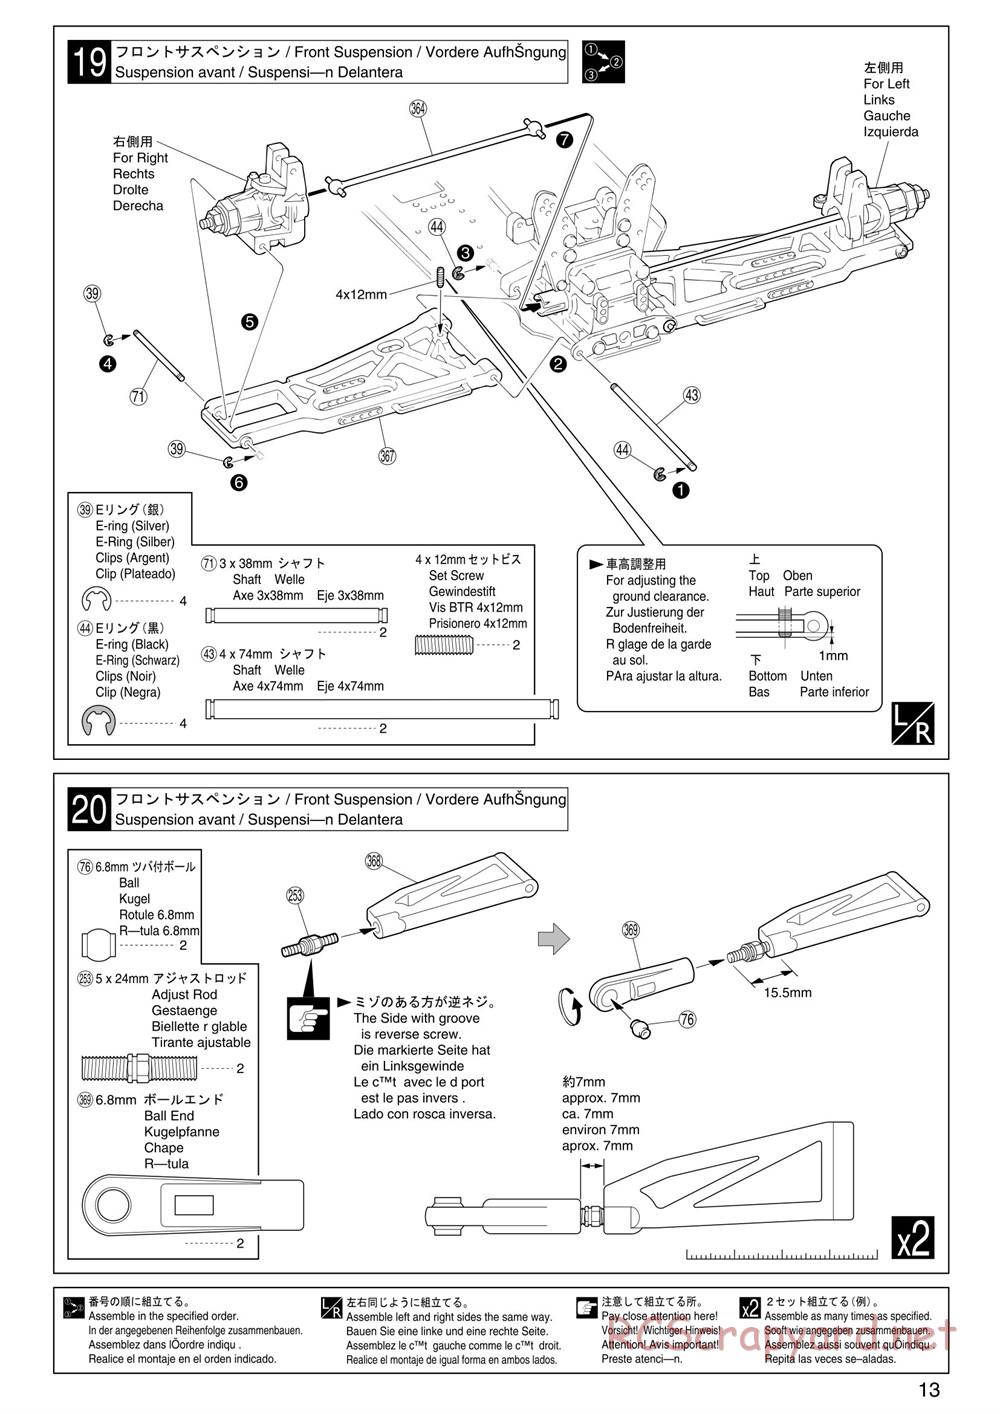 Kyosho - Inferno ST (2005) - Manual - Page 13